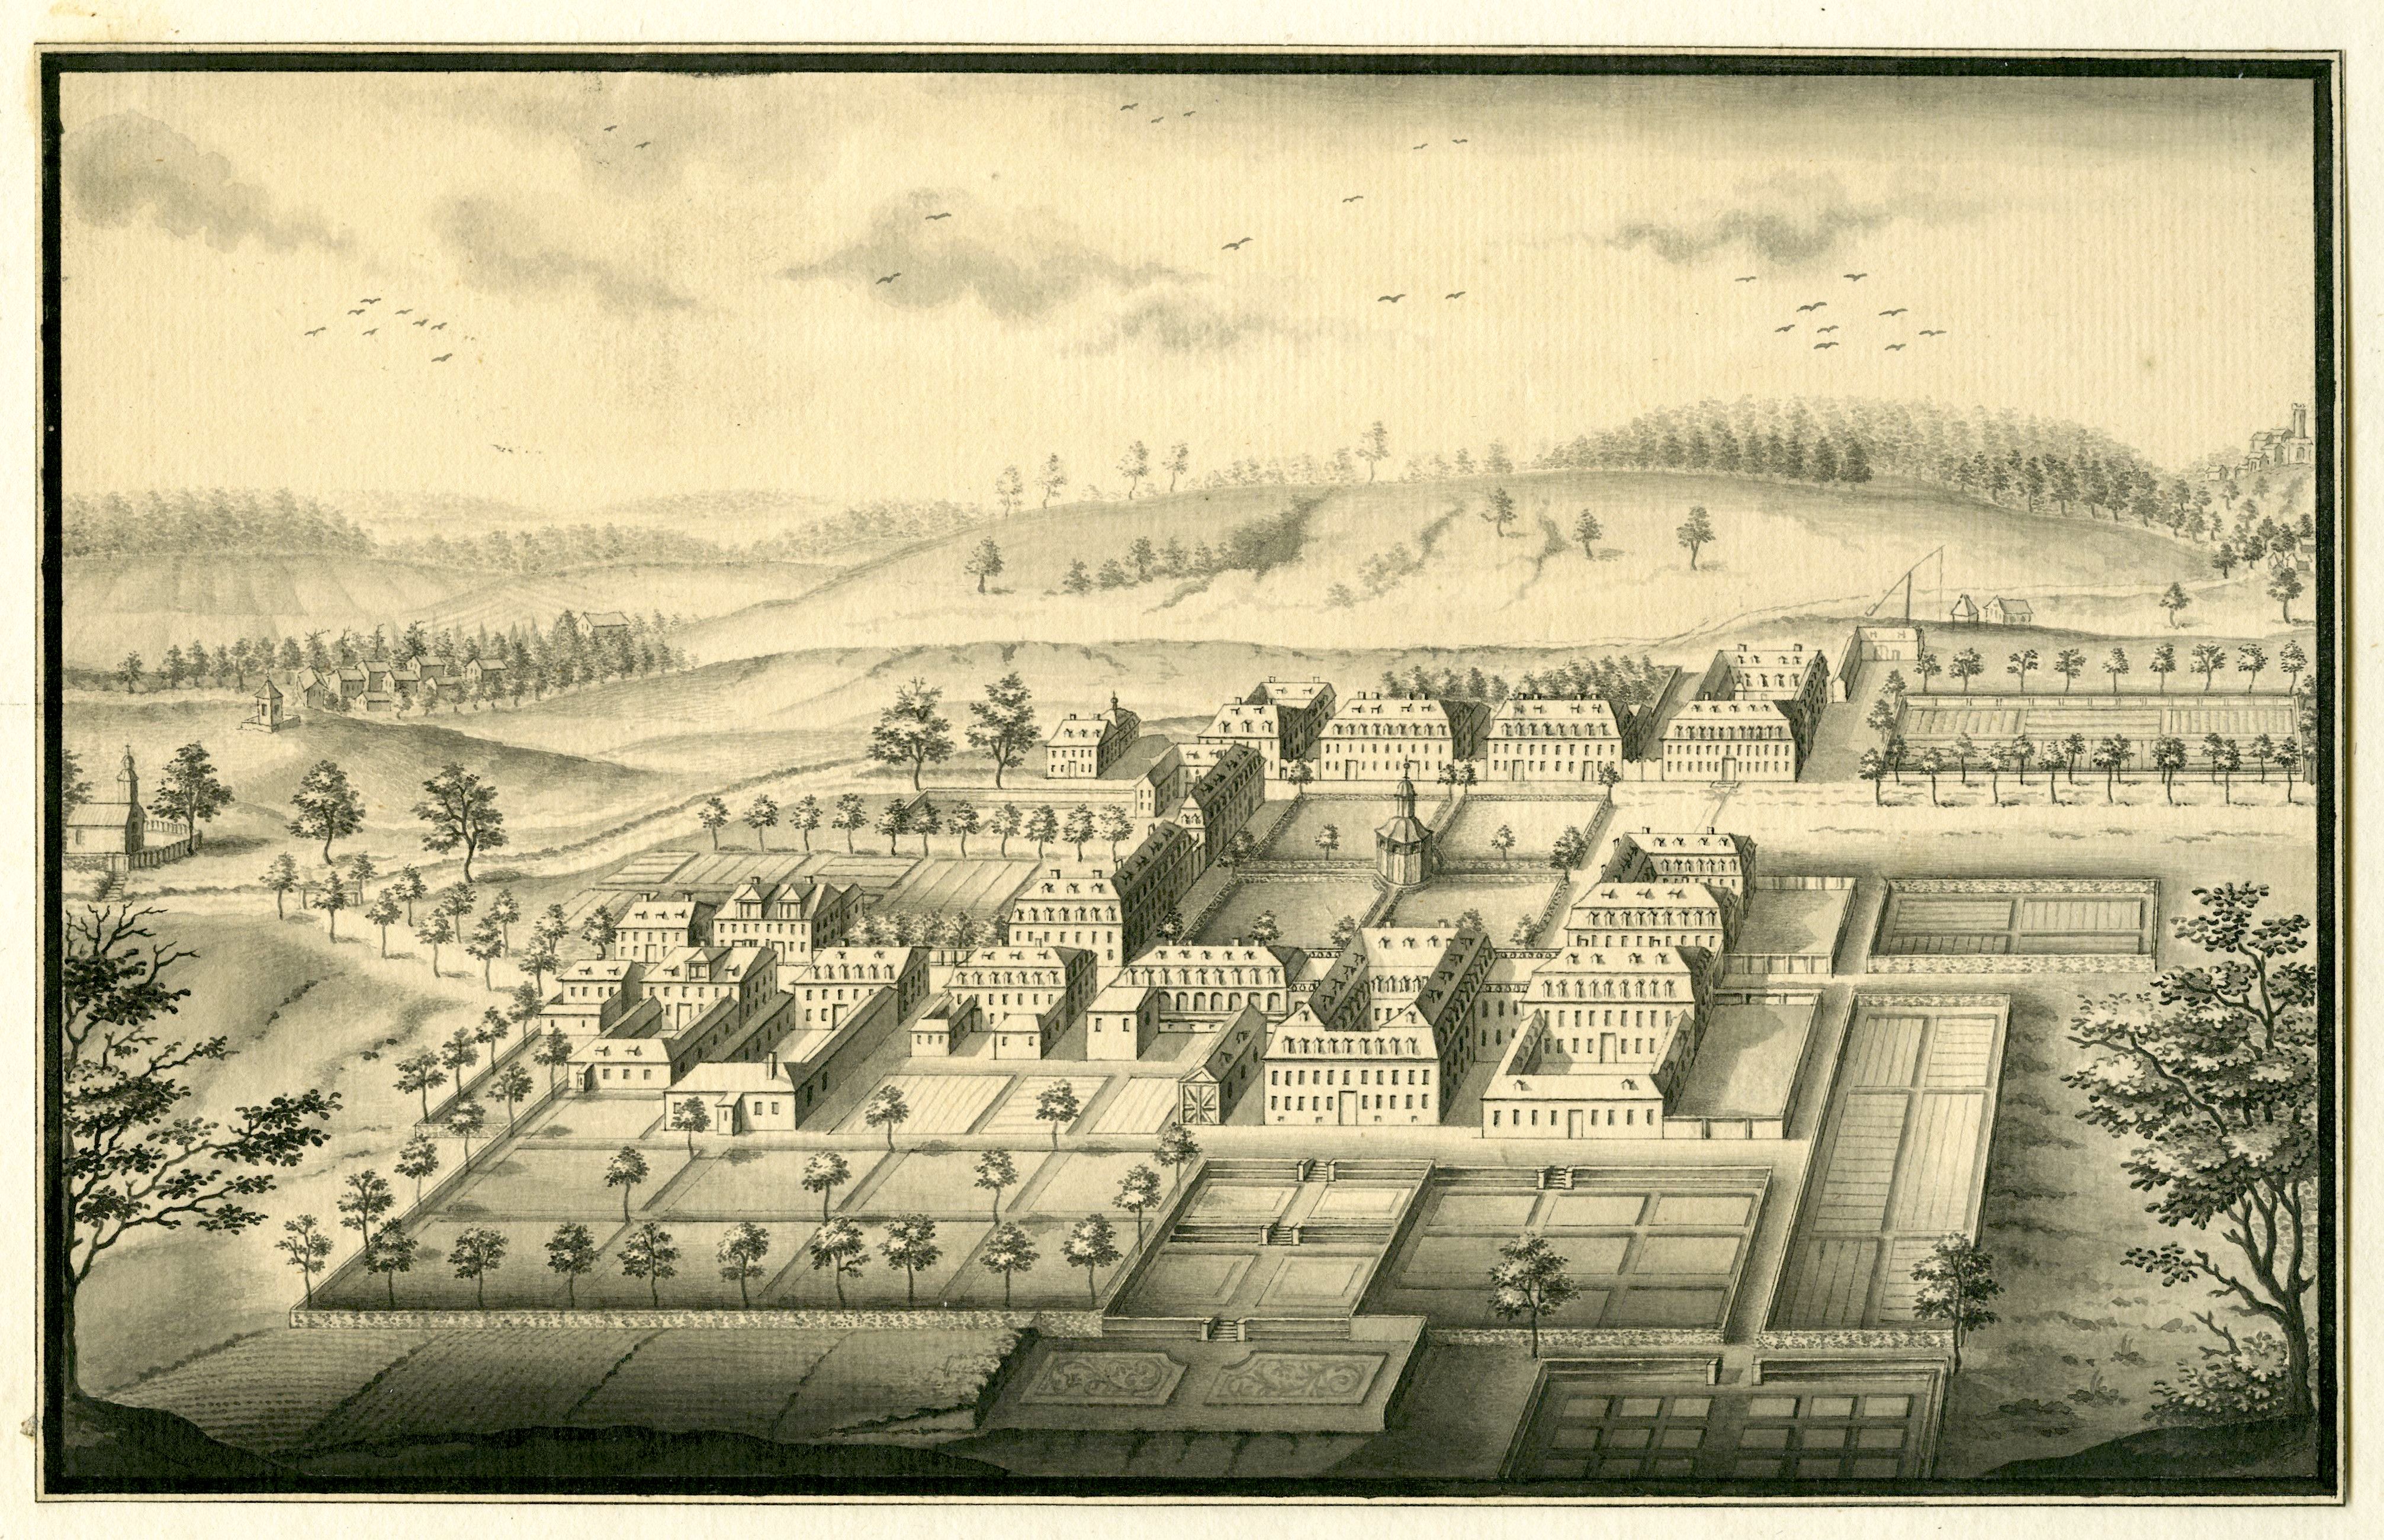 Drawing of the Herrnhaag in April 1752. The church is shown at the far left. On the back of the drawing is written: "Elie Gervais Dessiné a Herrnhag le 27. Avril 1752". Source: © Foto Wolfgang Fuhrmannek, Hessisches Landesmuseum Darmstadt, CC BY-SA 4.0. Used with the permission of the Hessisches Landesmuseum Darmstadt.